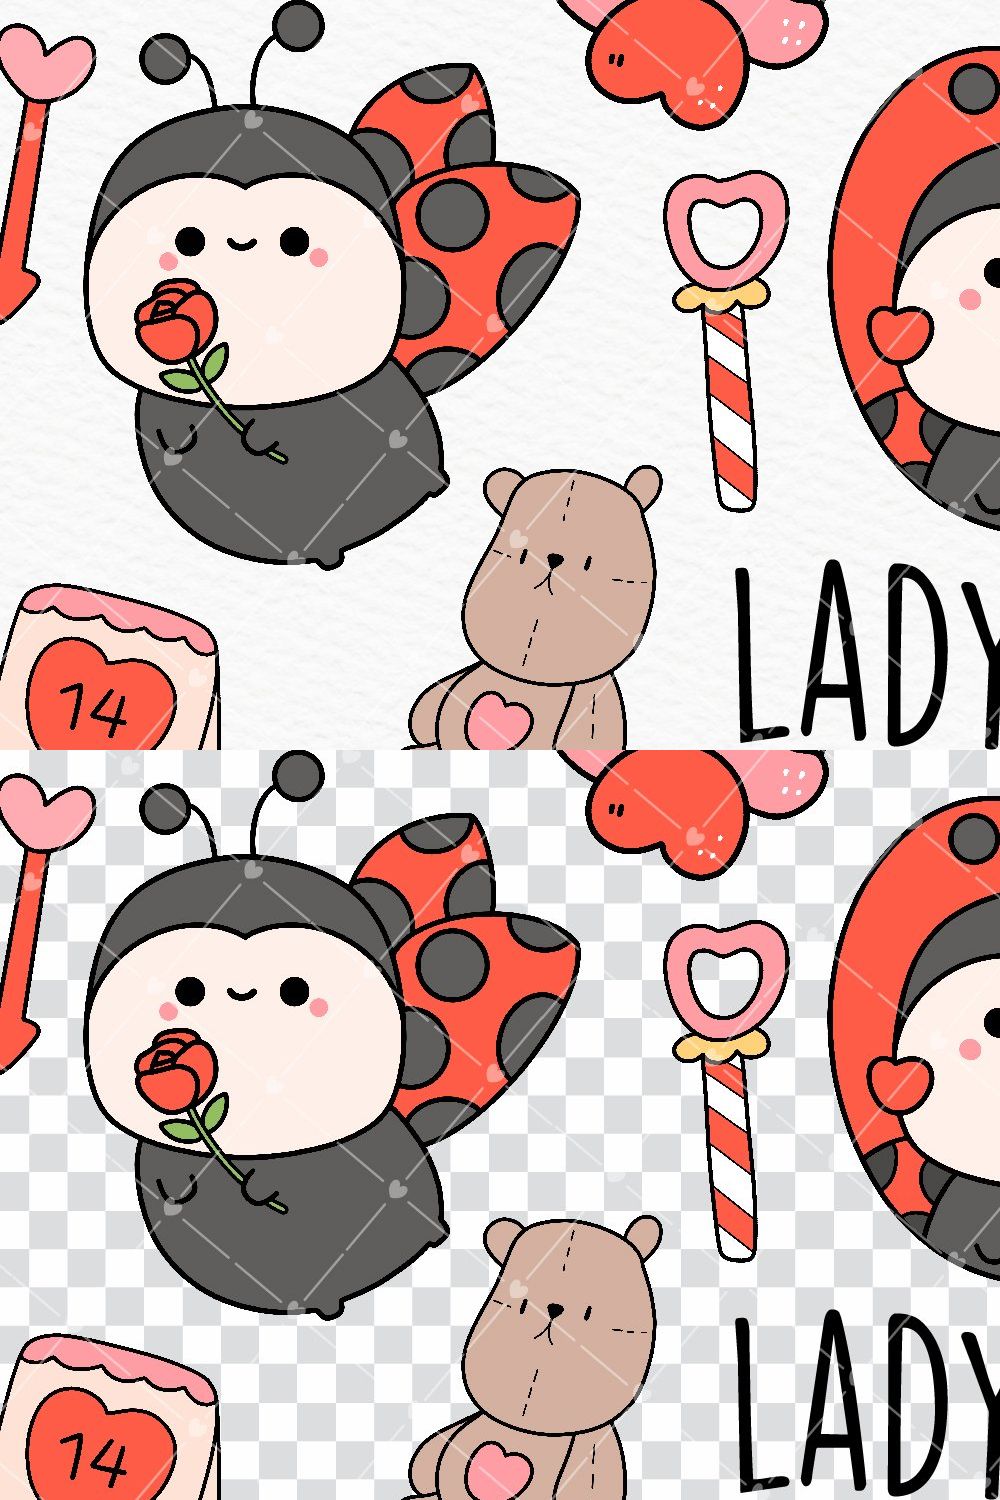 Valentine's day ladybug clipart pinterest preview image.